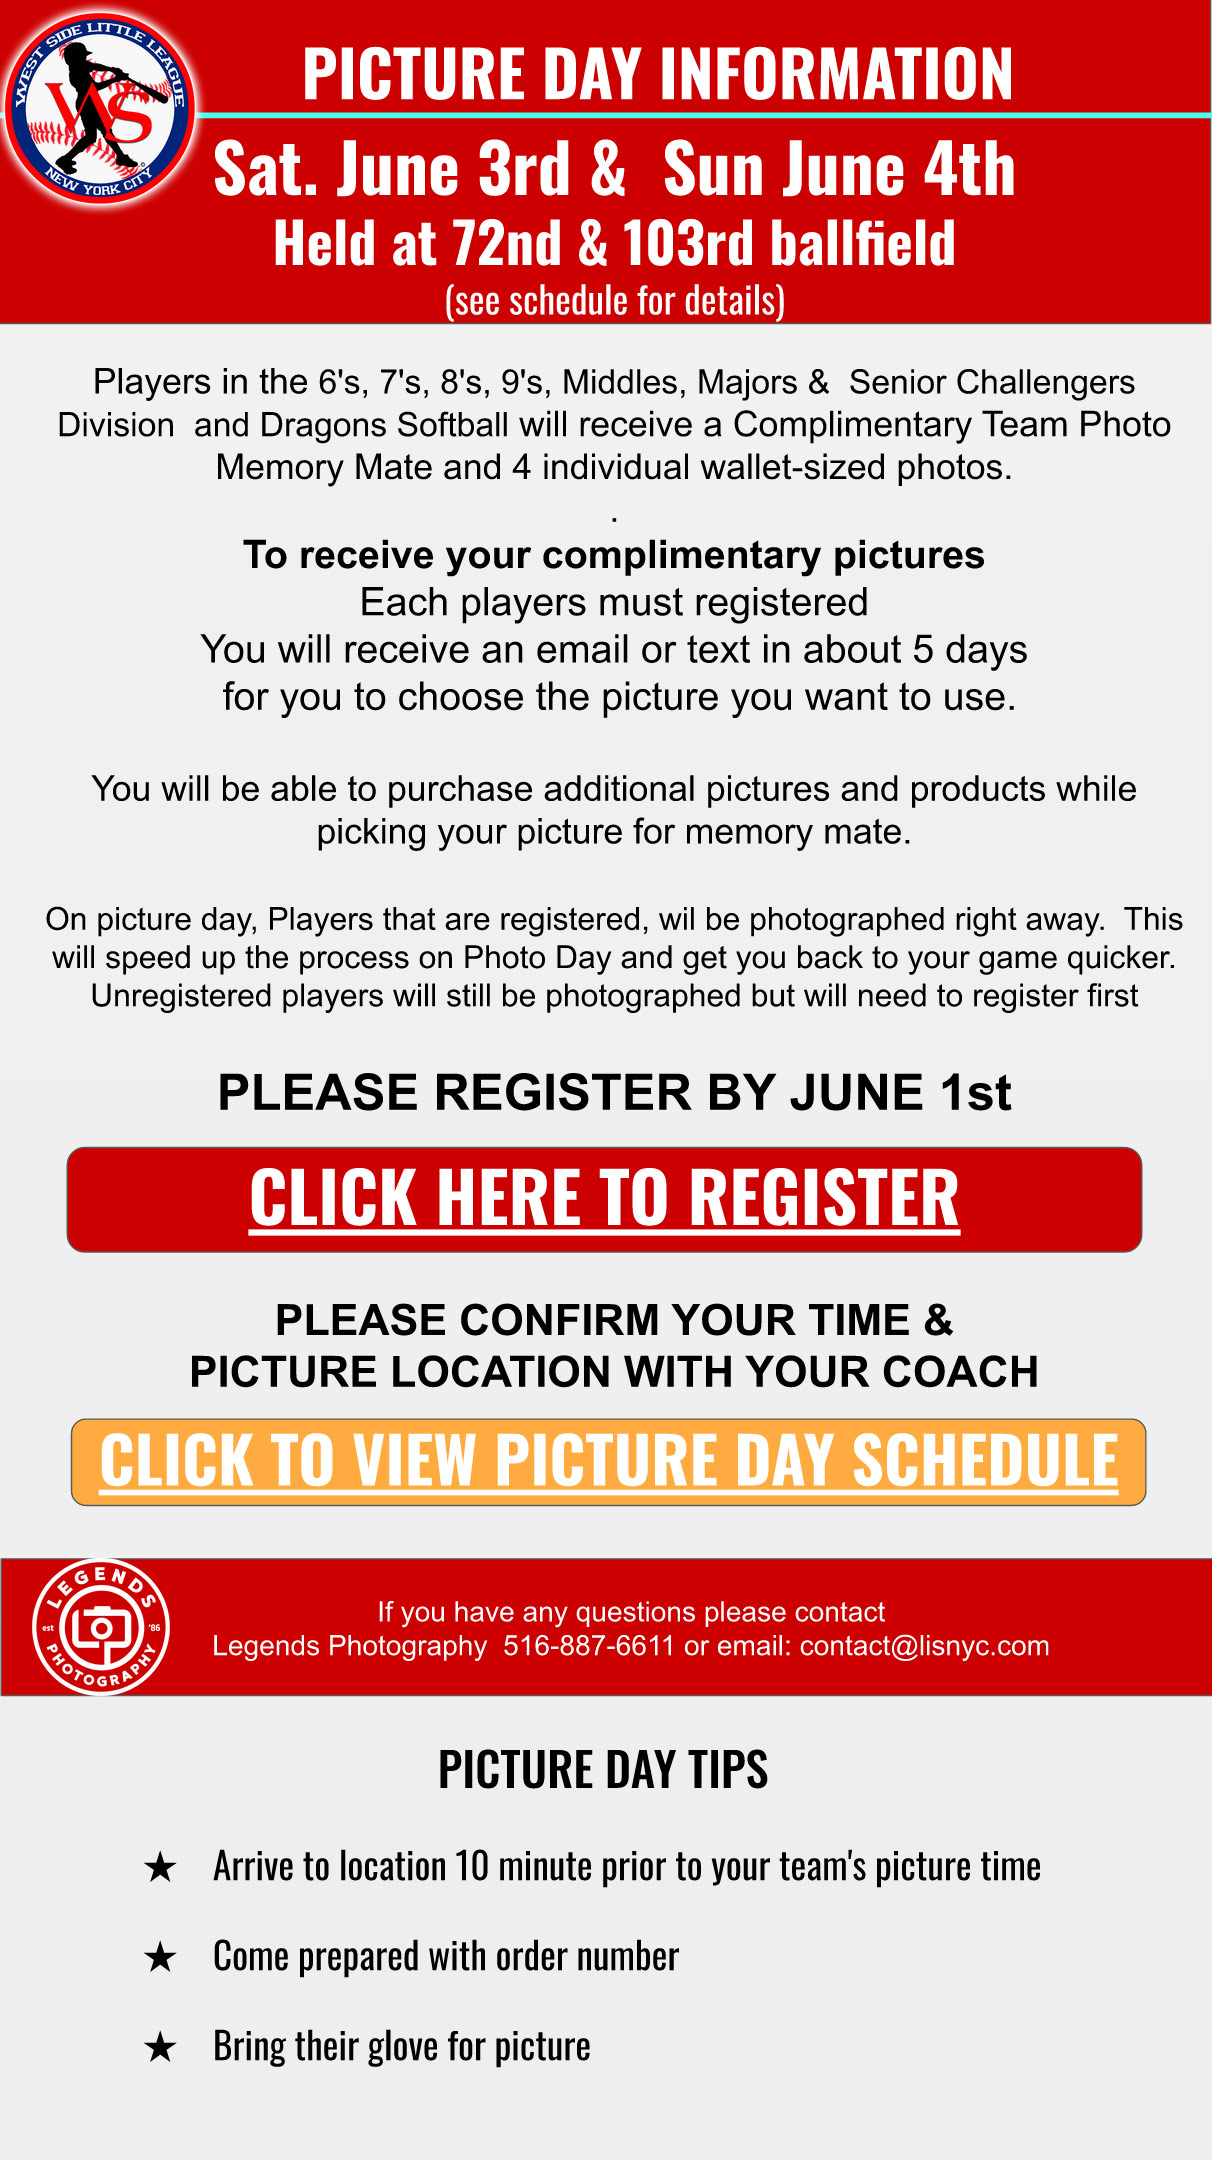 West Side Little League Photo Day is June 3rd & 4th